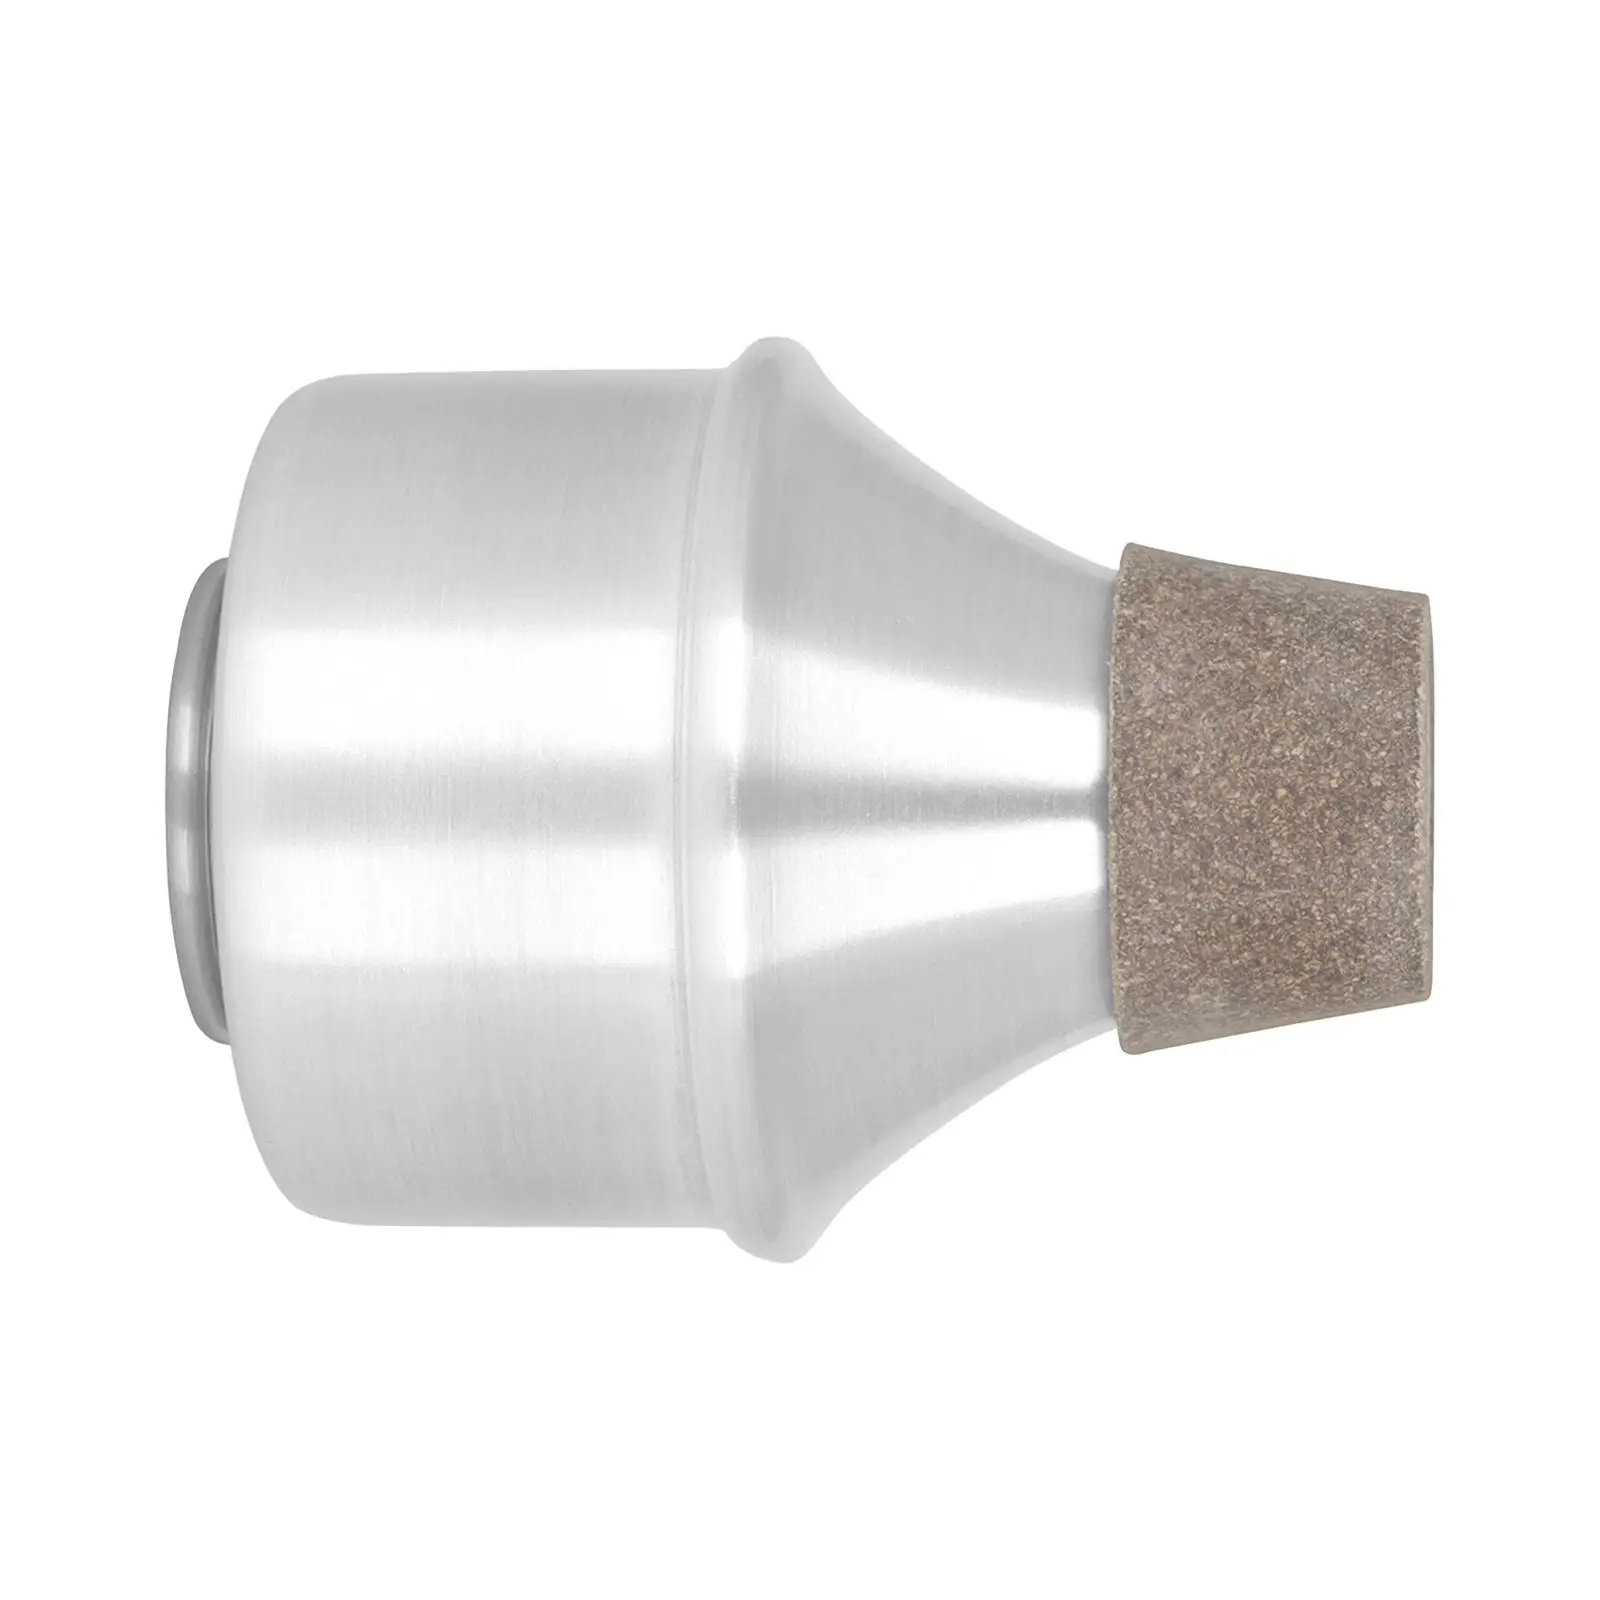 Wah Mute for Trumpet Trumpet Wah Mute Trumpet Straight Mute Lightweight Wah Mute for Jazz Replacement Accessories